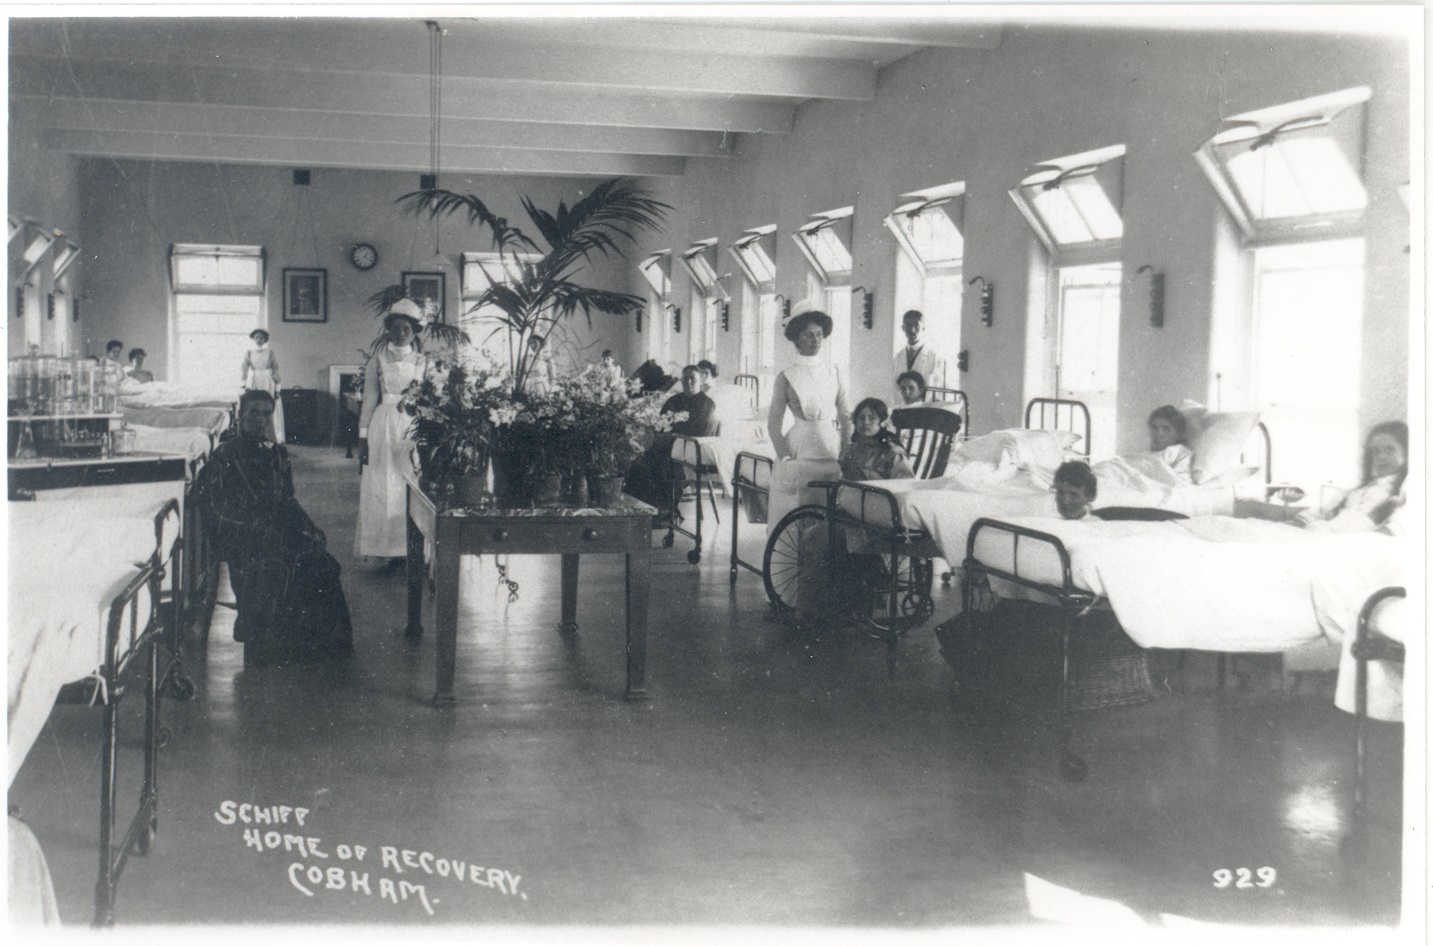 Postcard of the Schiff Home of Recovery, Cobham, showing interior of ward with adults and children, nurses and a doctor.